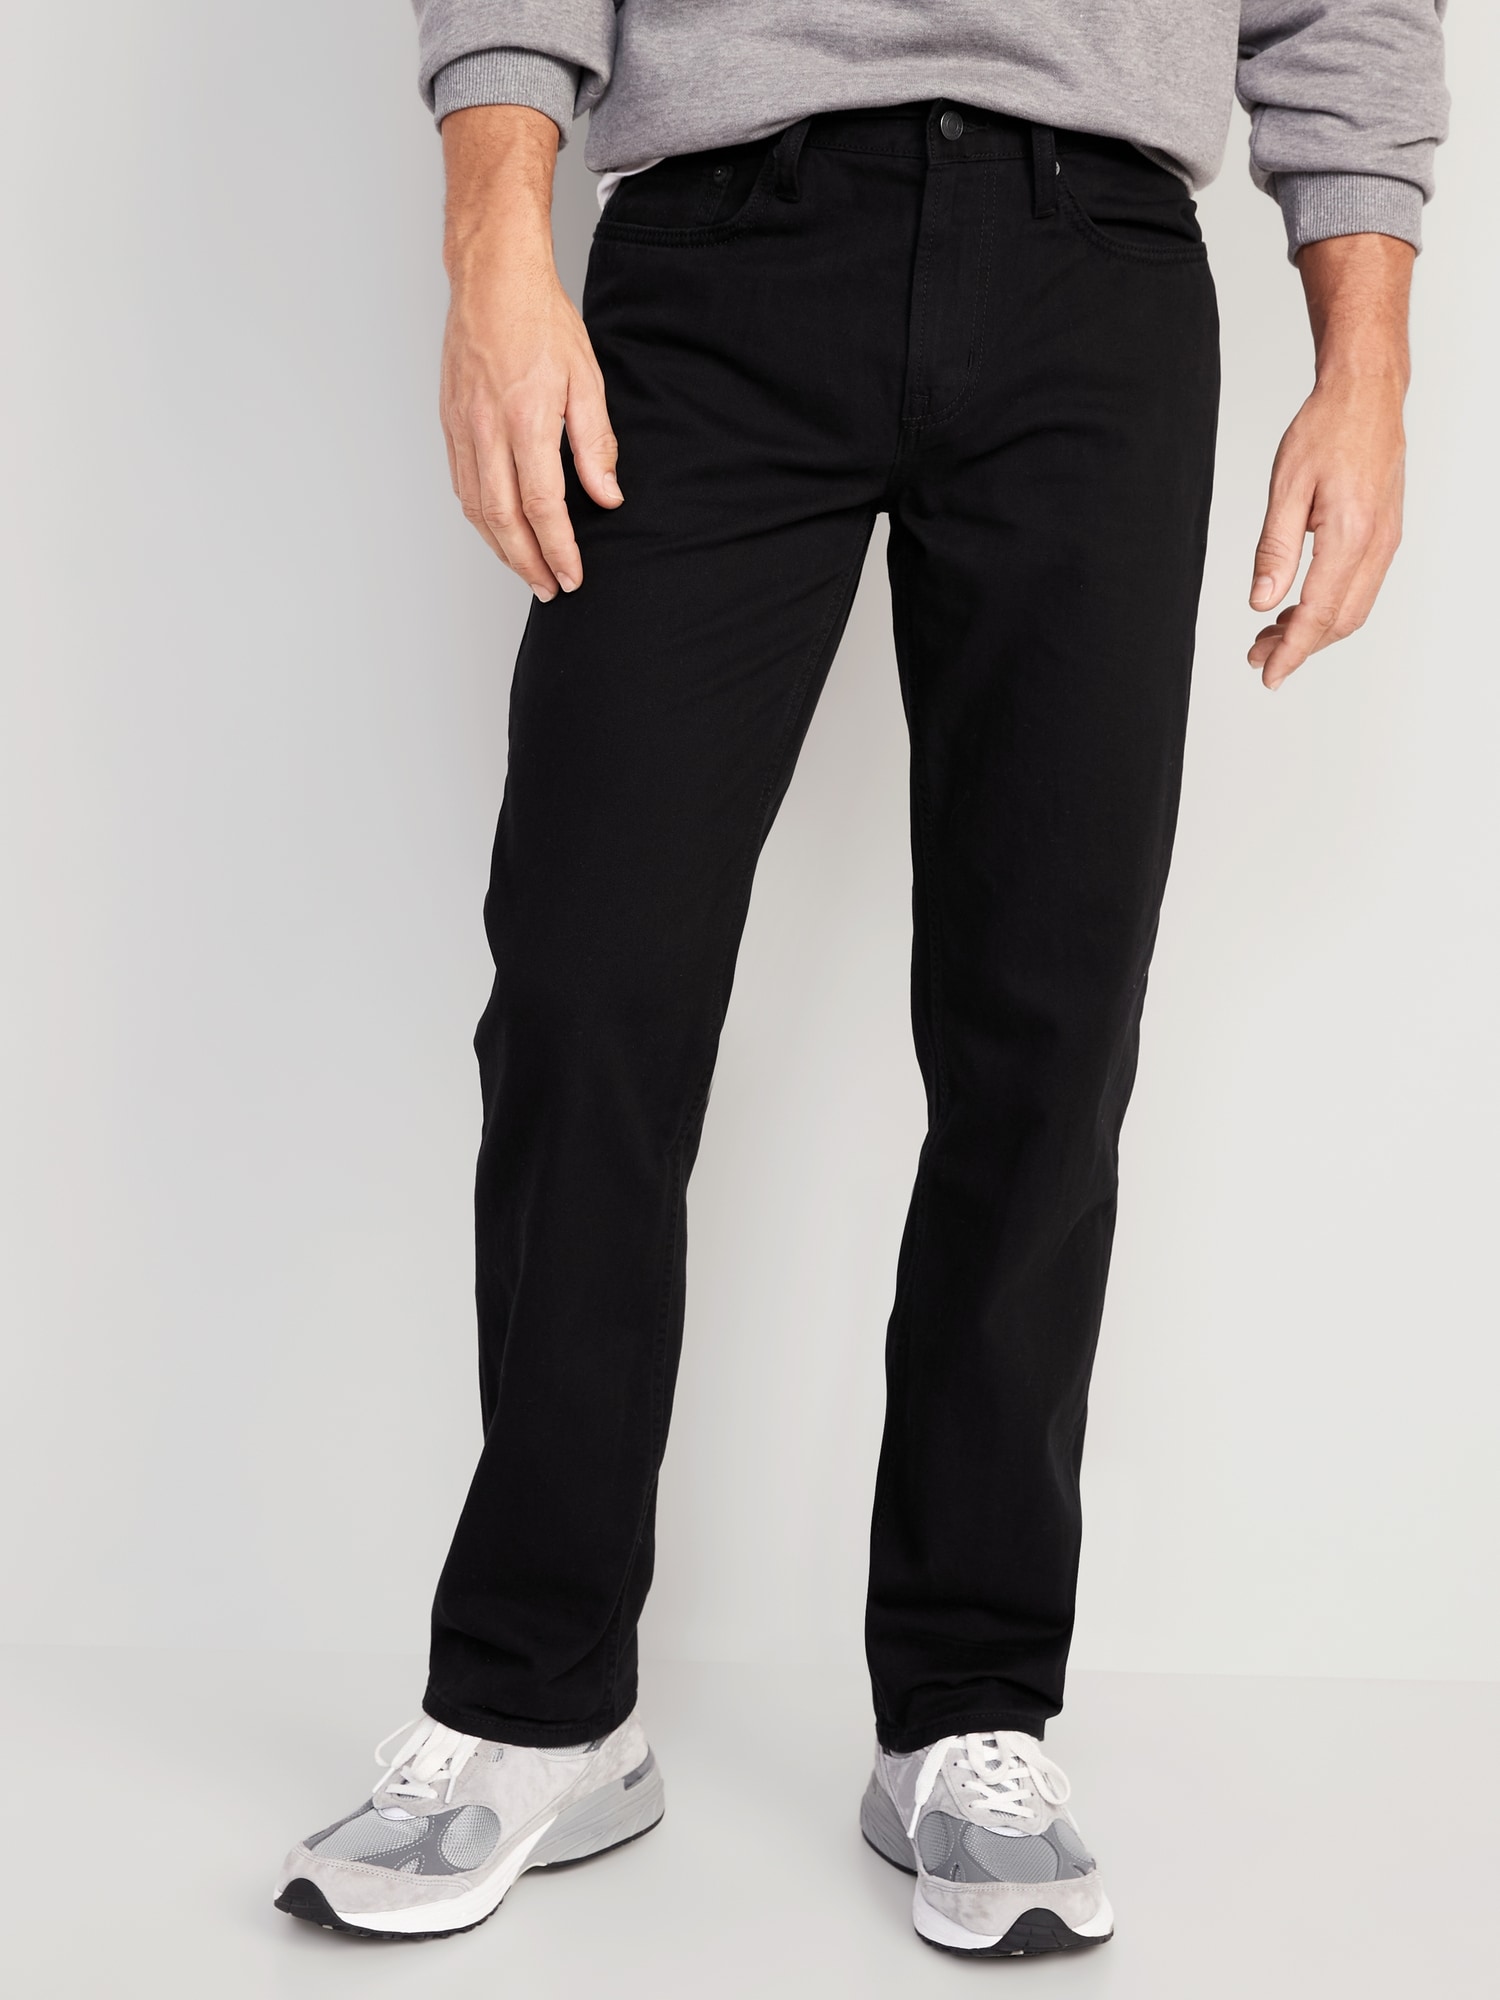 Wow Loose Non-Stretch Black Jeans | Old Navy